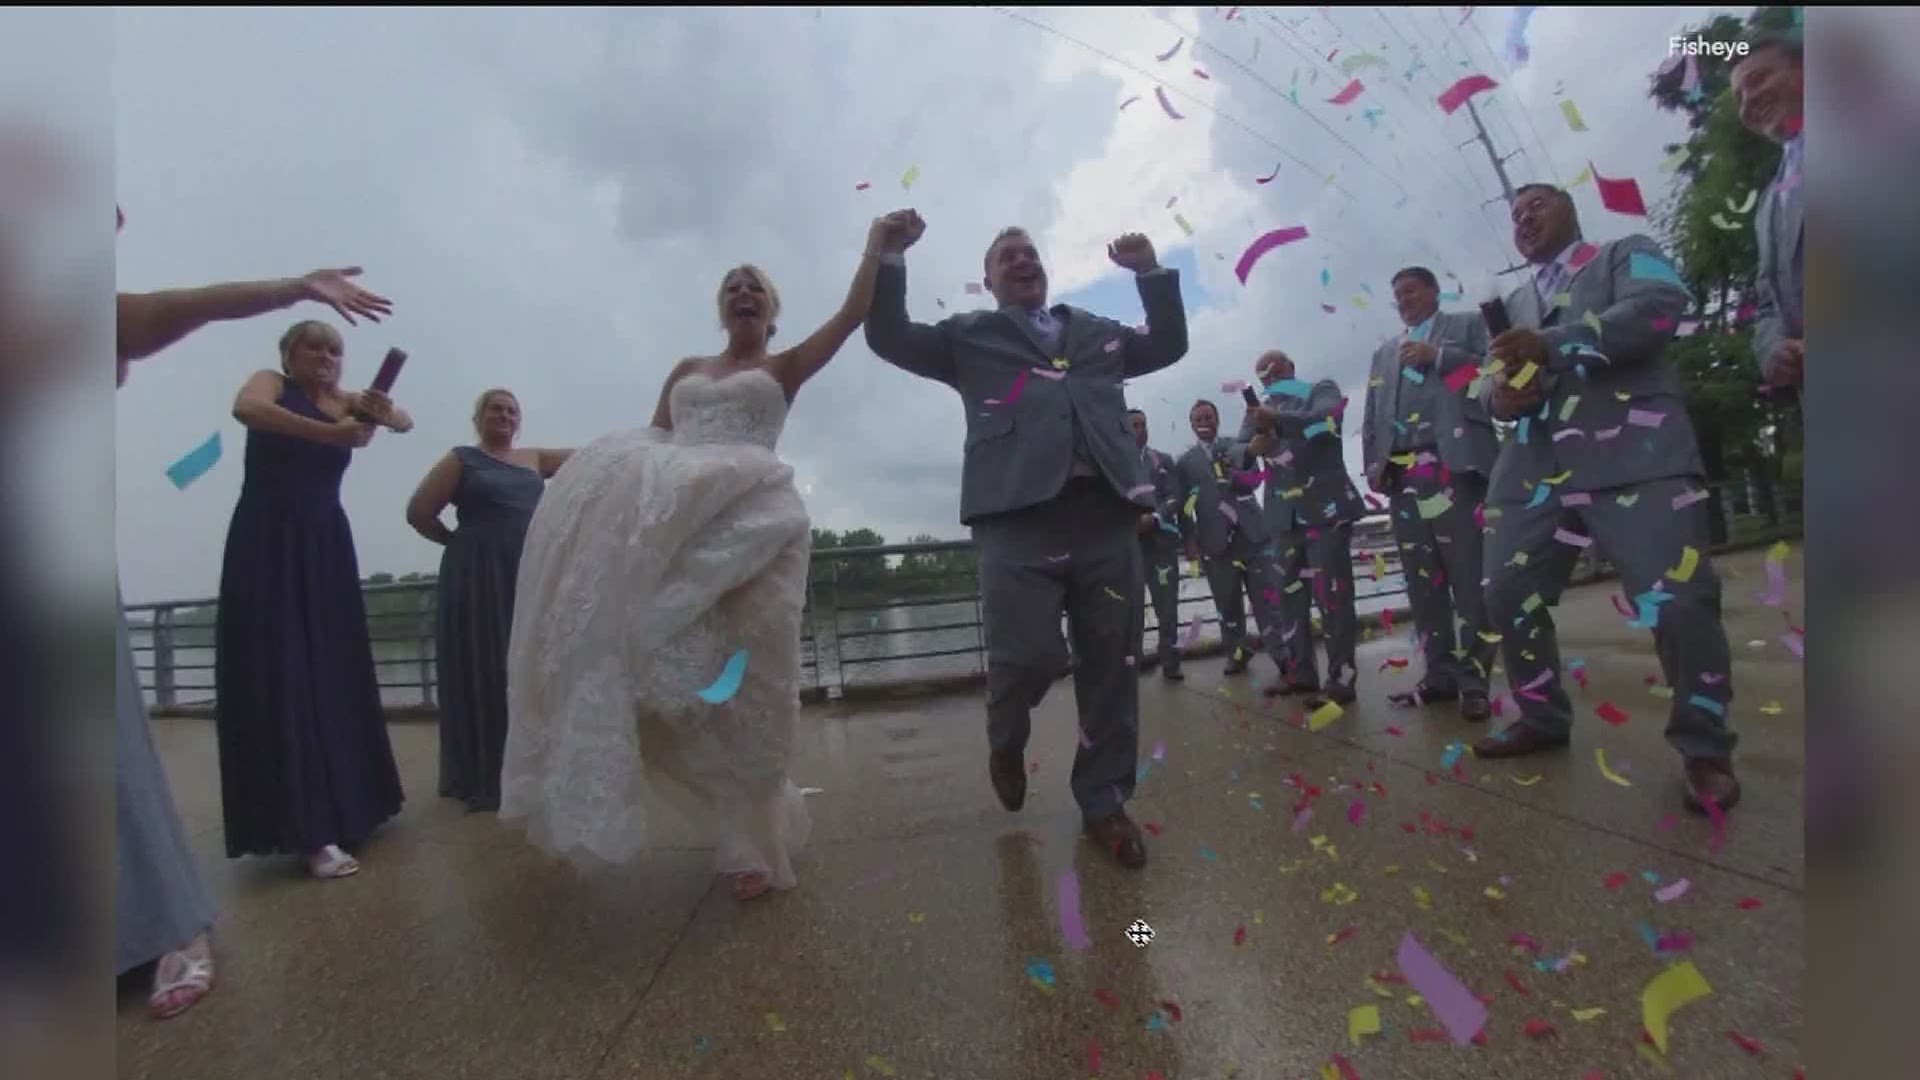 The owner is pioneering the use of 360 photography and videography for weddings.